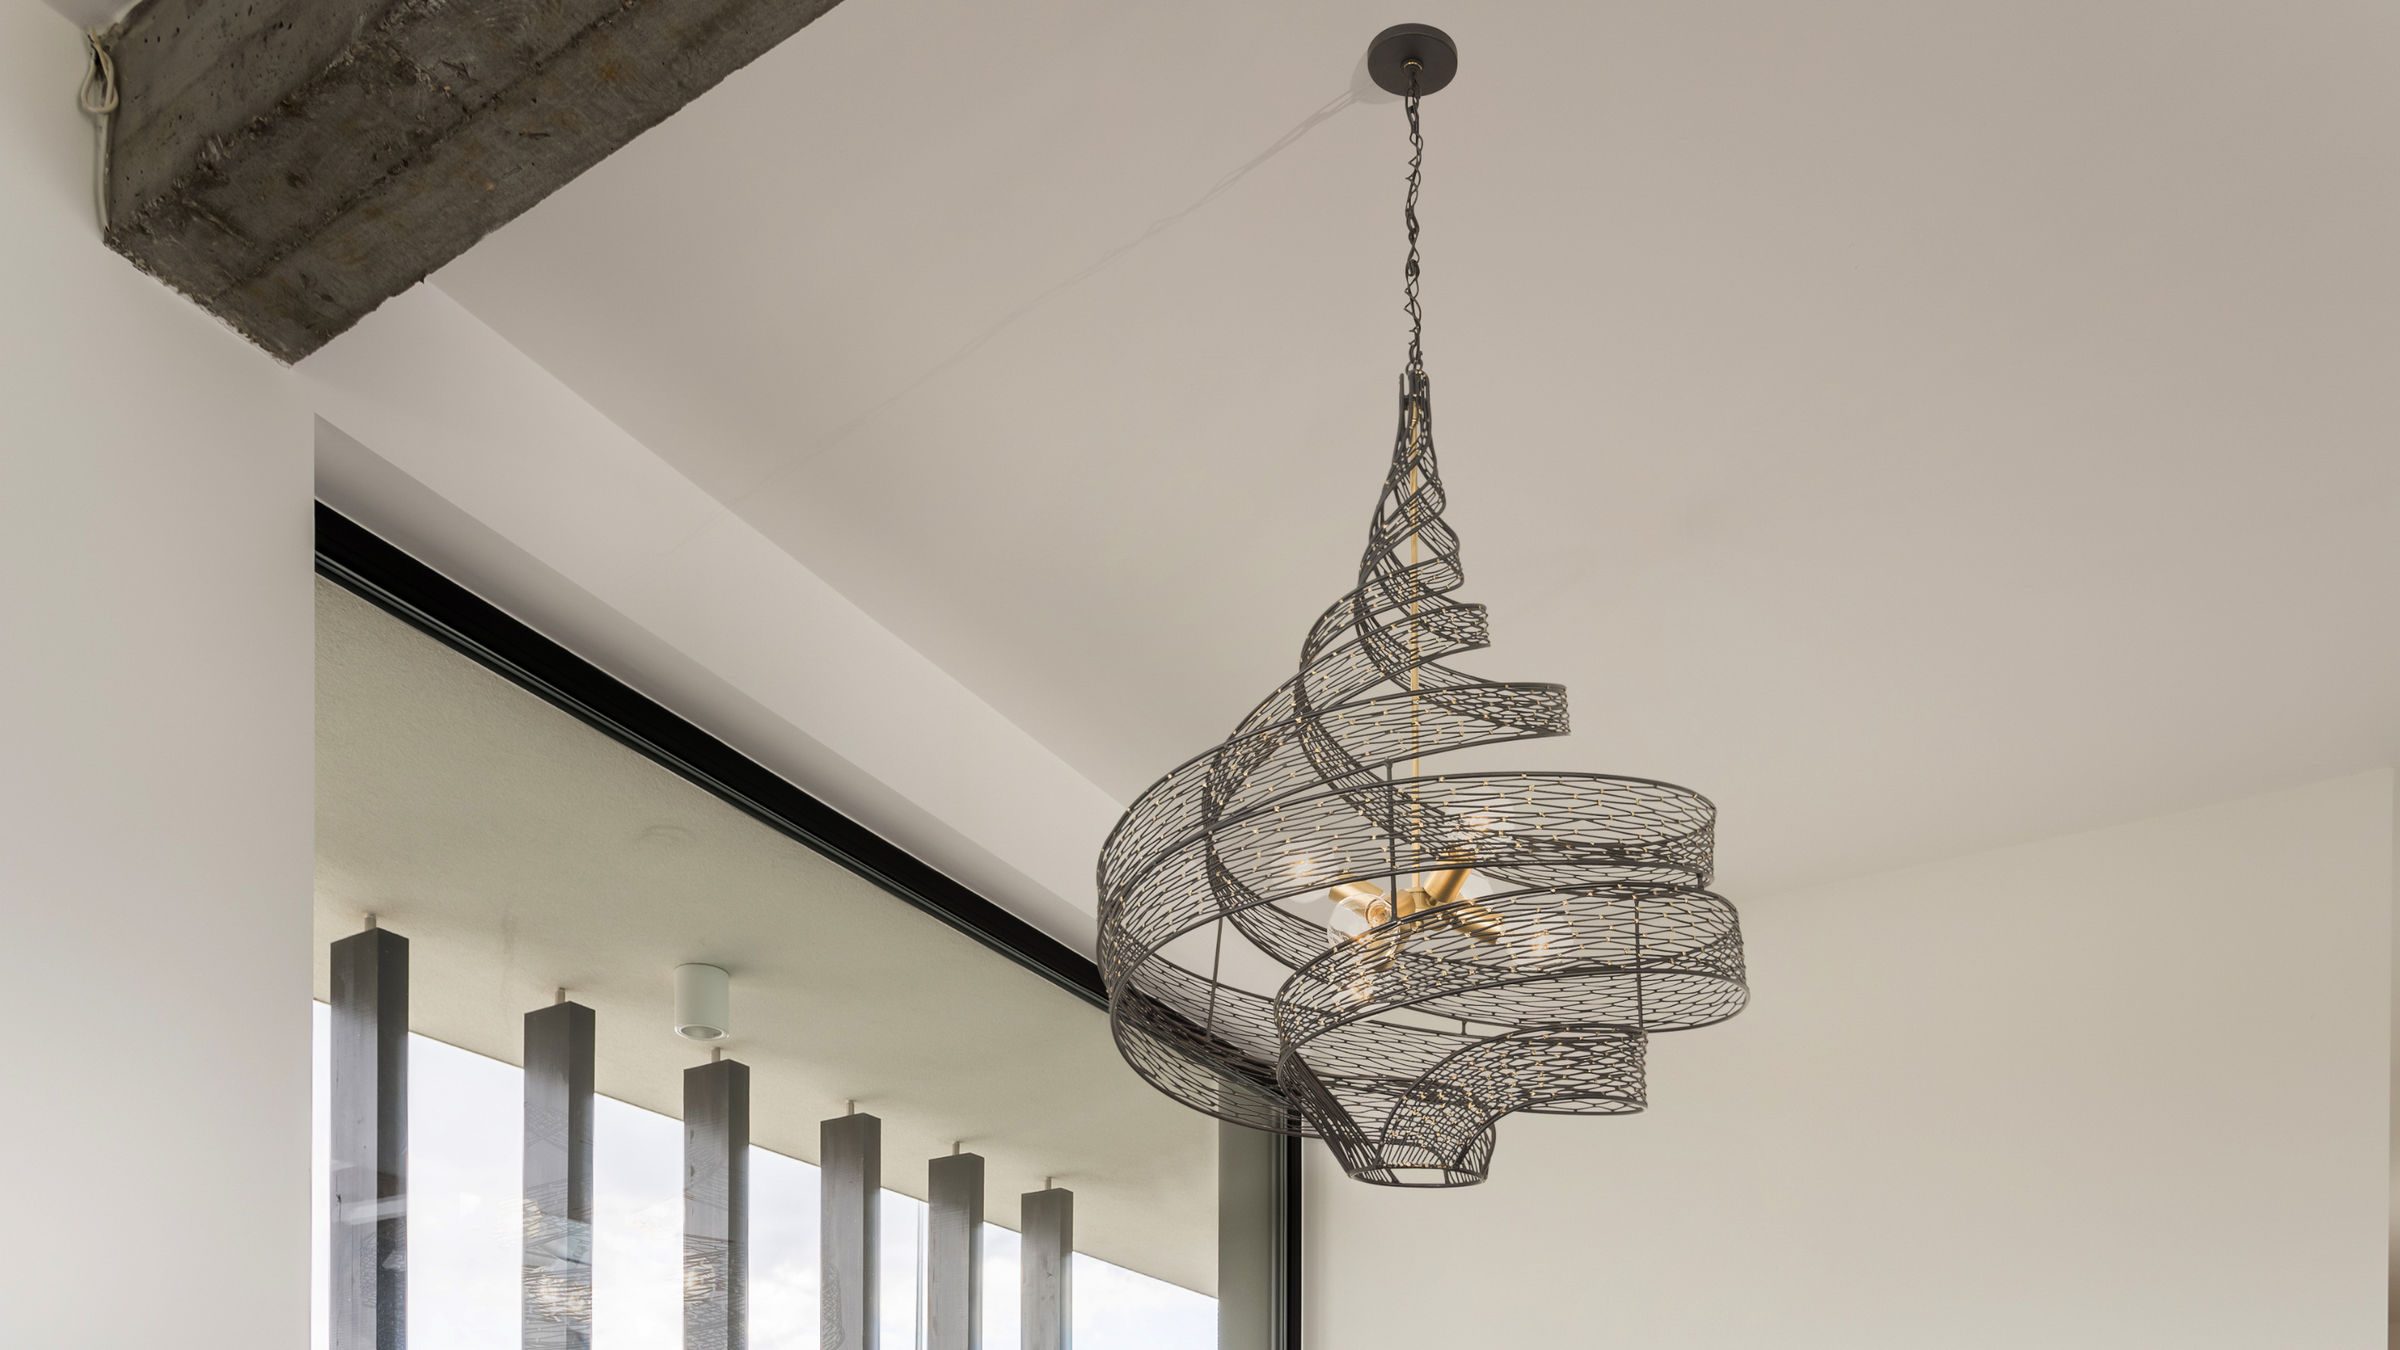 Flow twist pendant shown hung on ceiling next to wooden beam